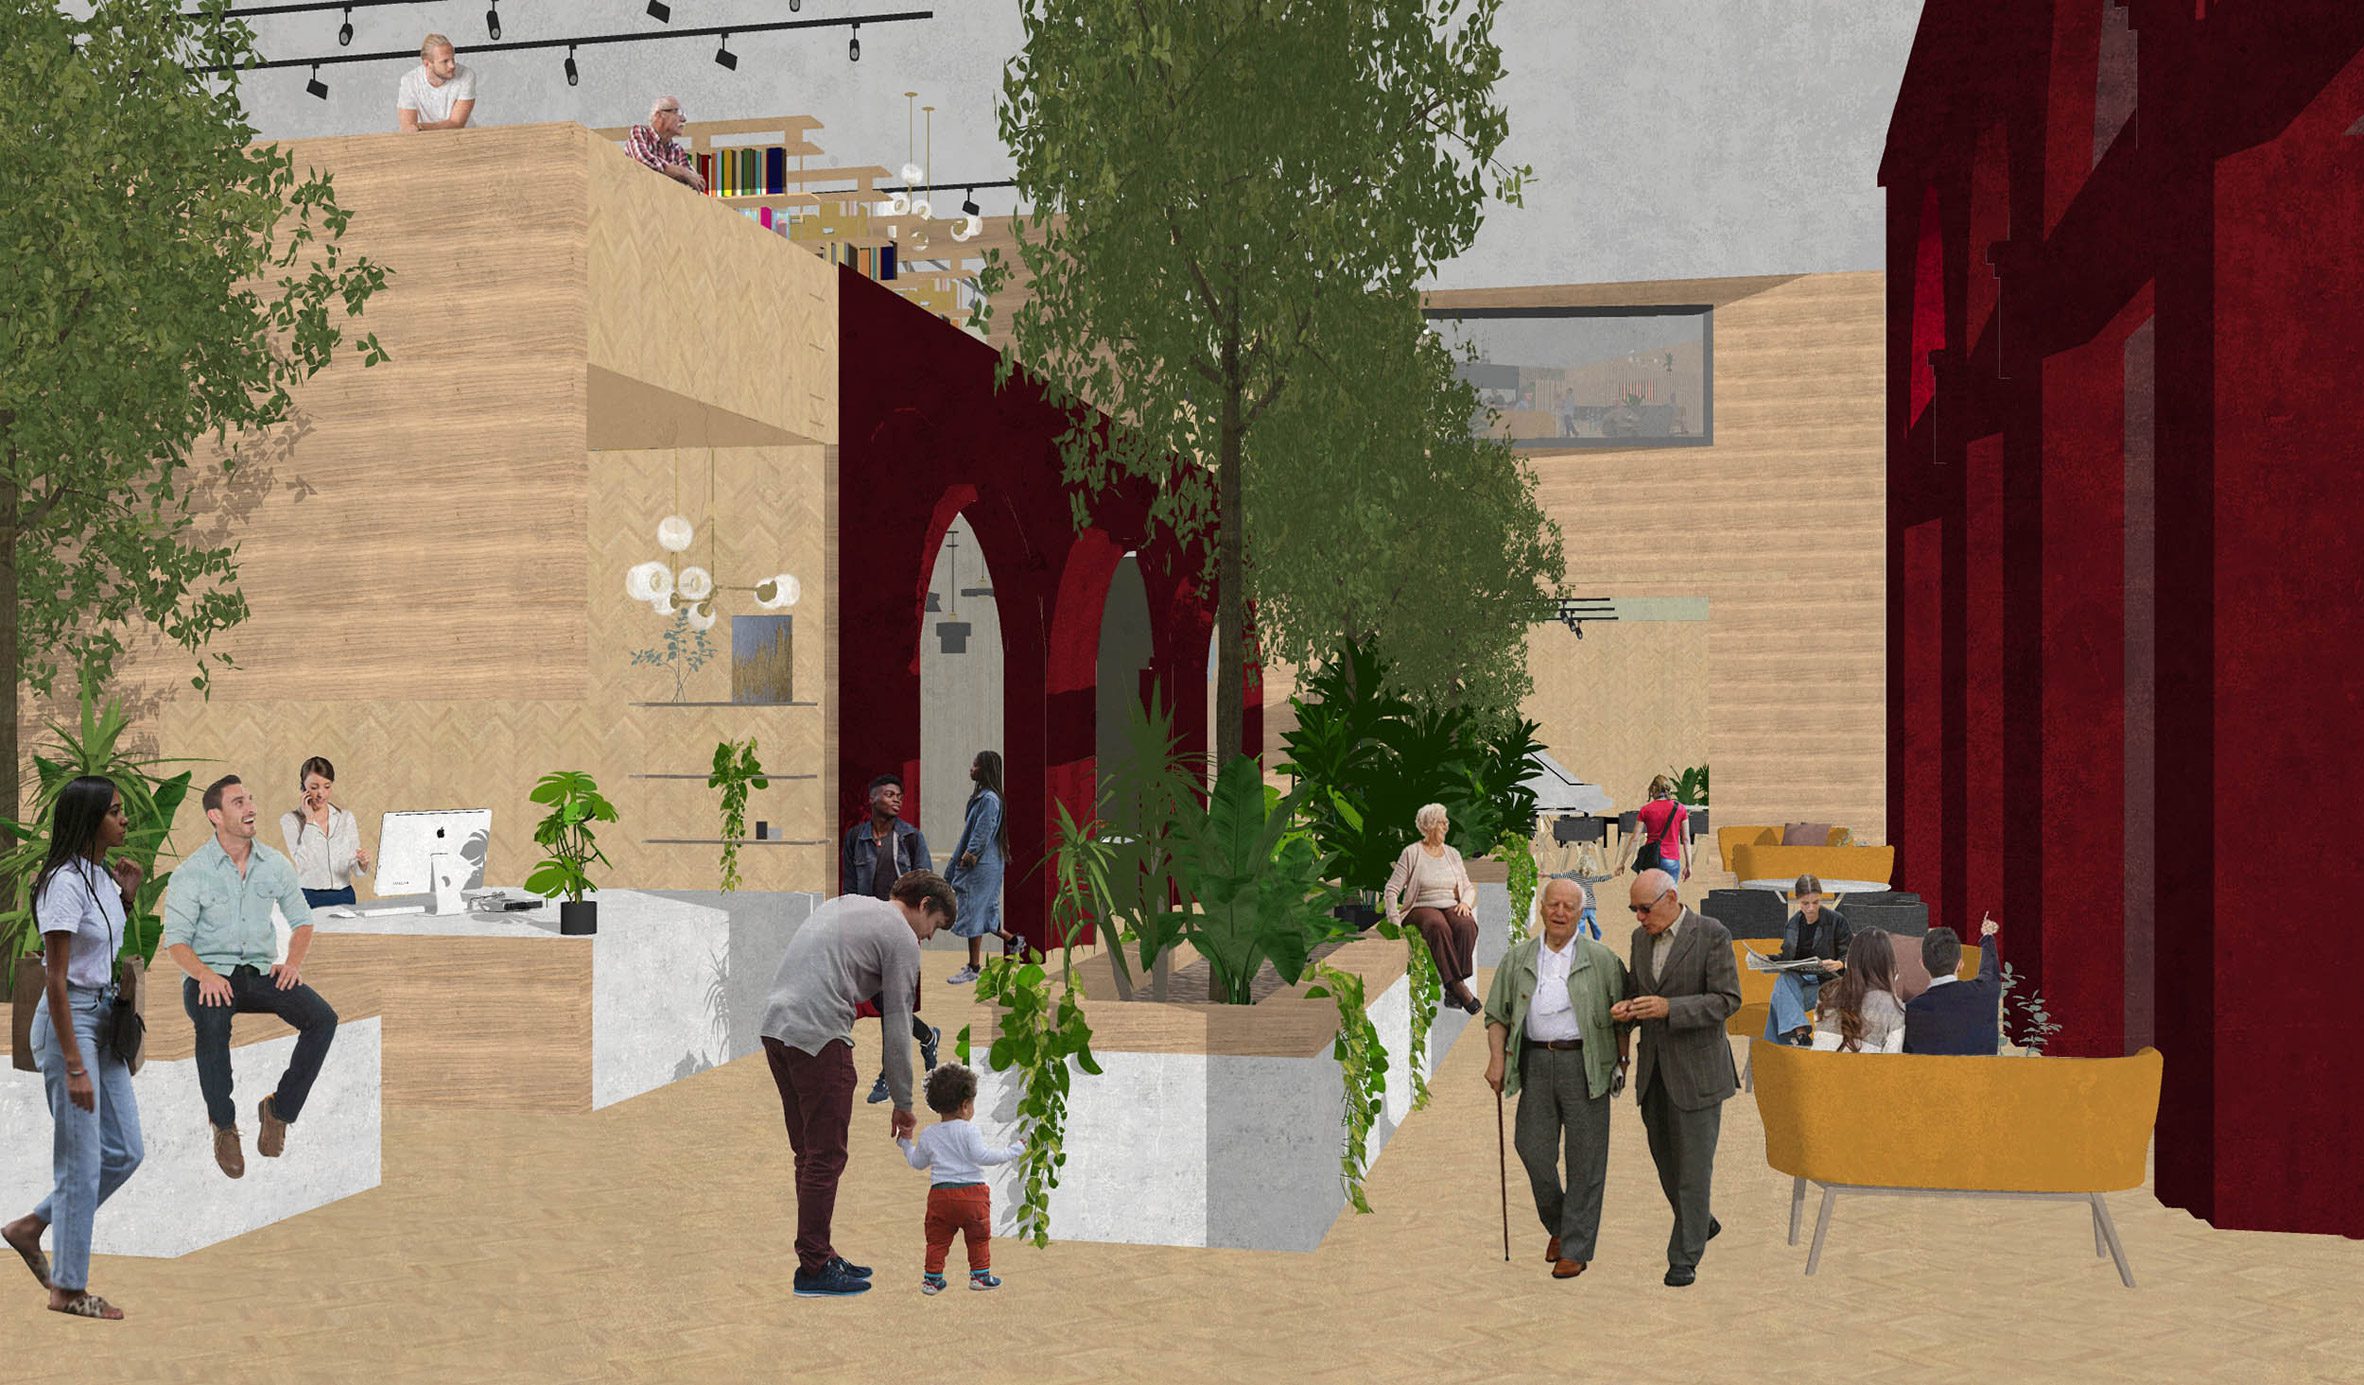 An illustration of a centre designed for the elderly